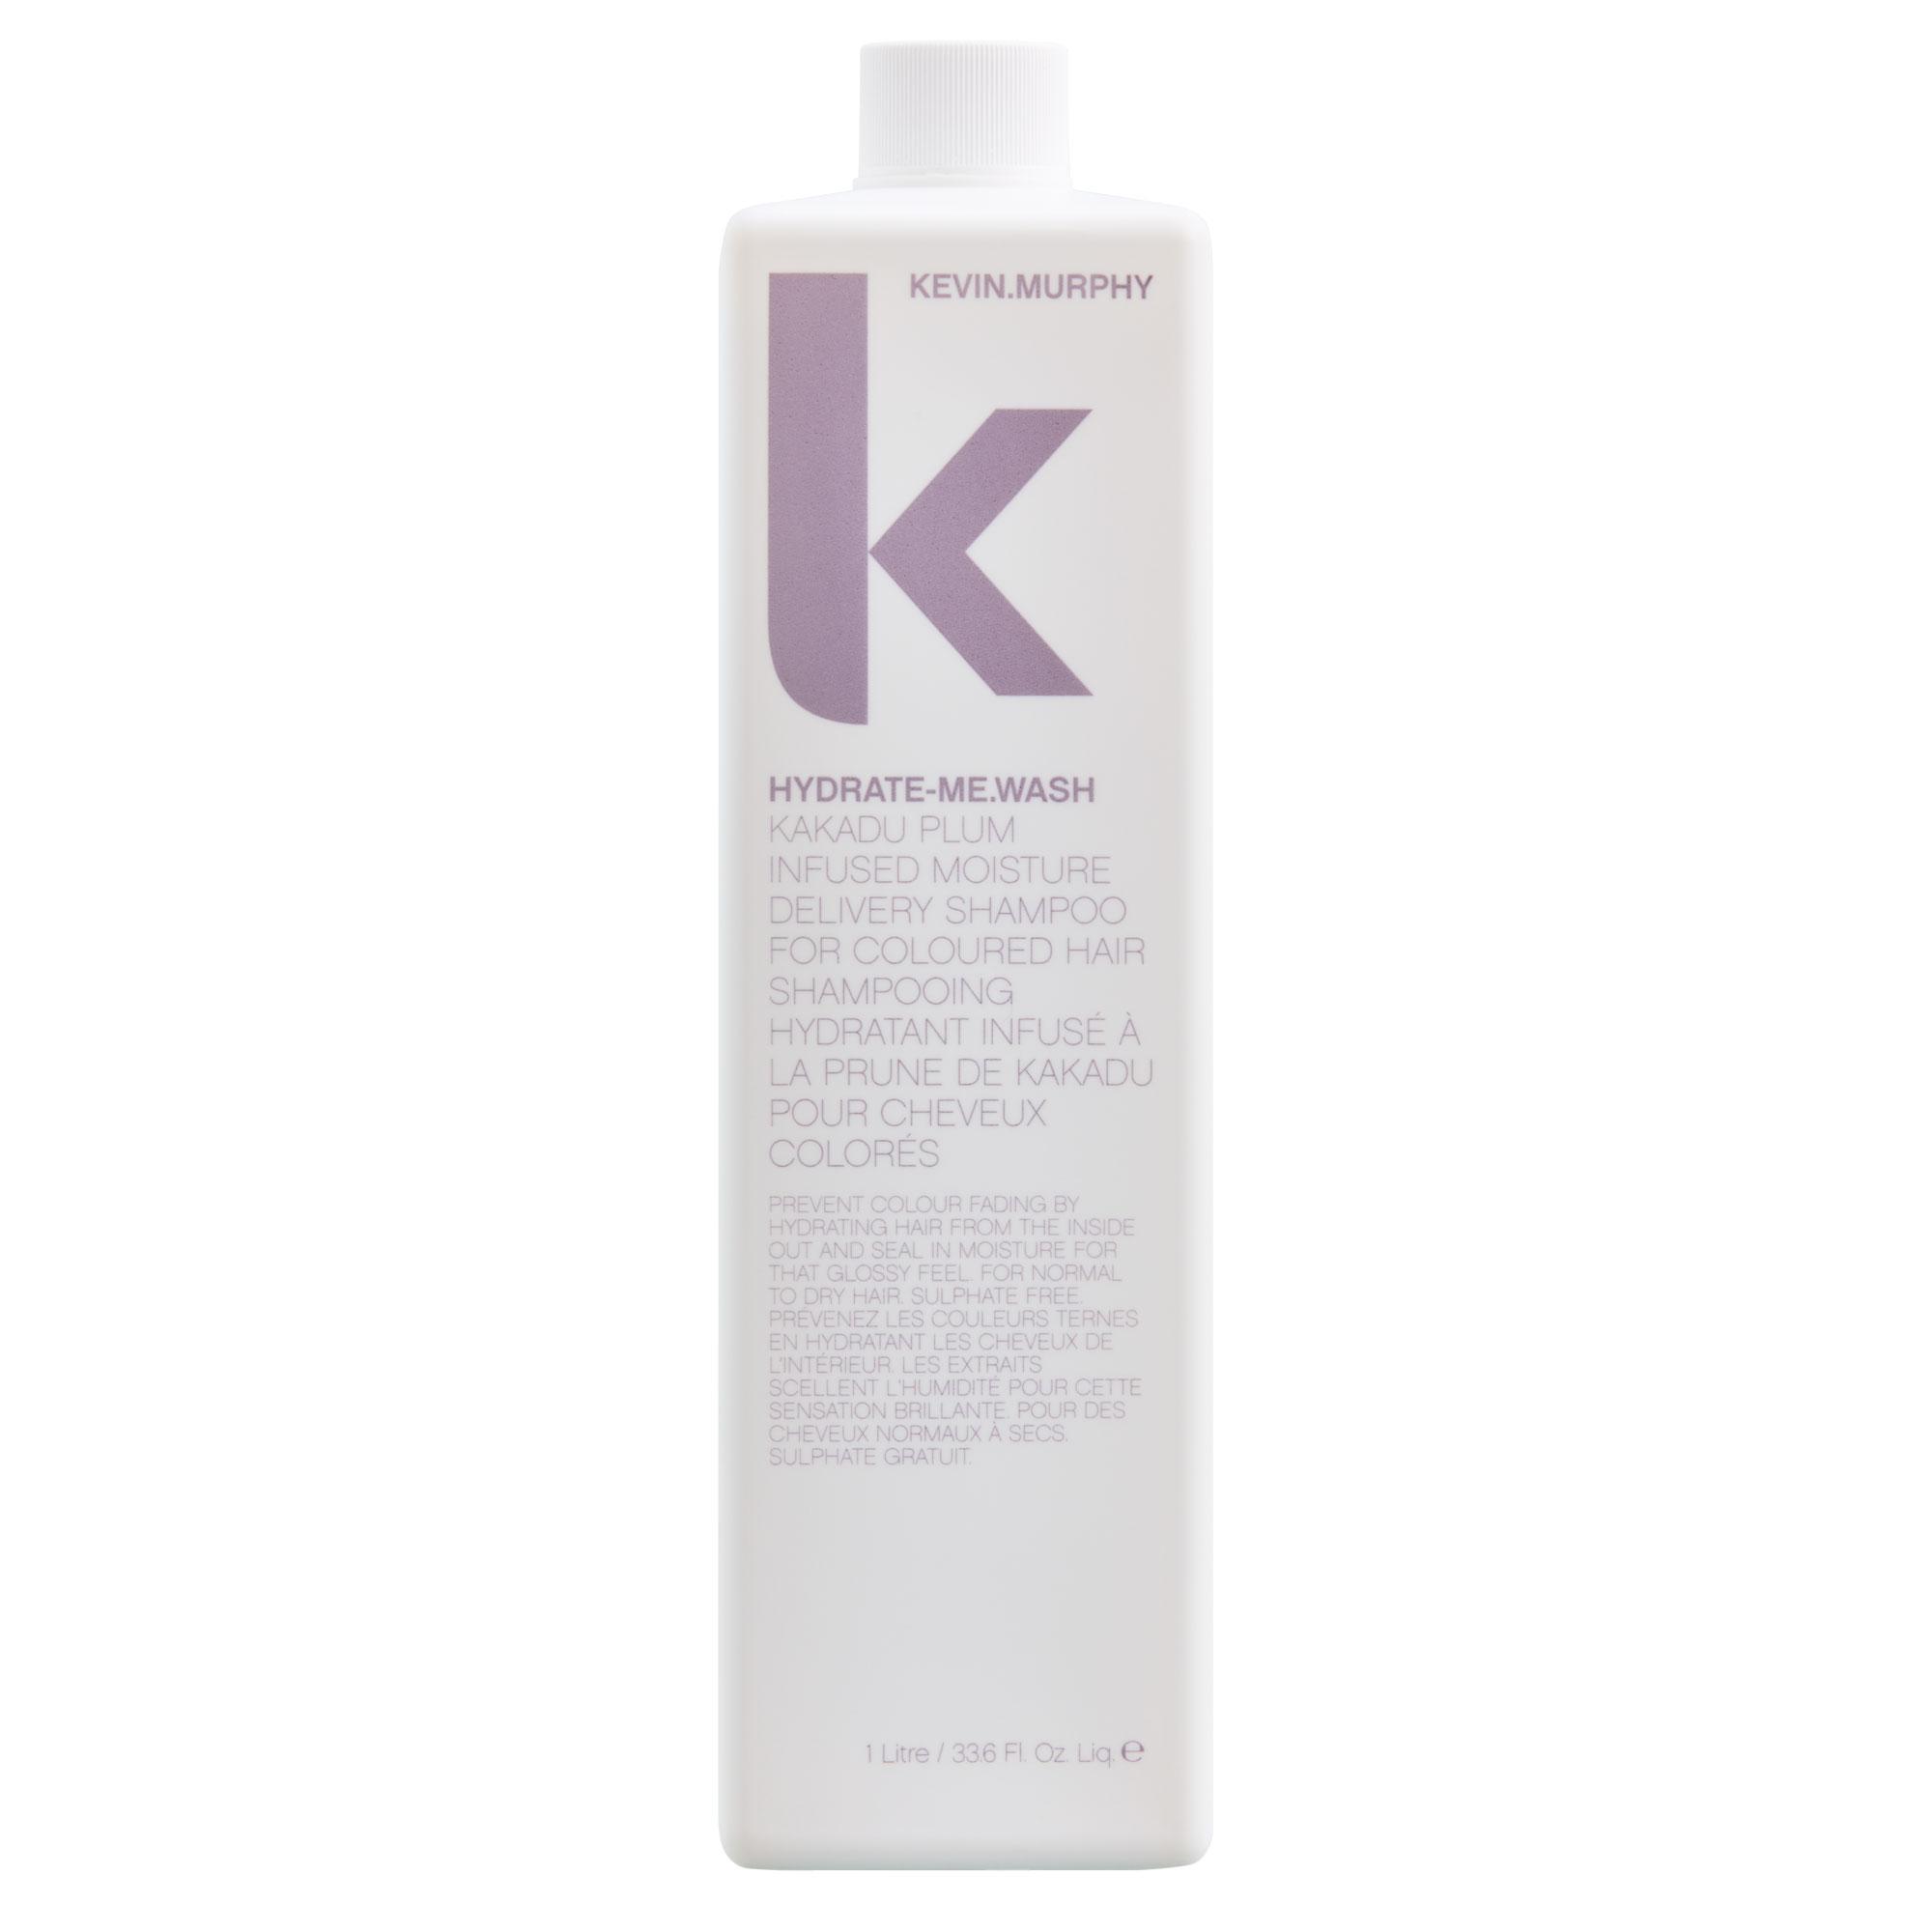 KEVIN.MURPHY HYDRATE-ME.WASH - 1 liter